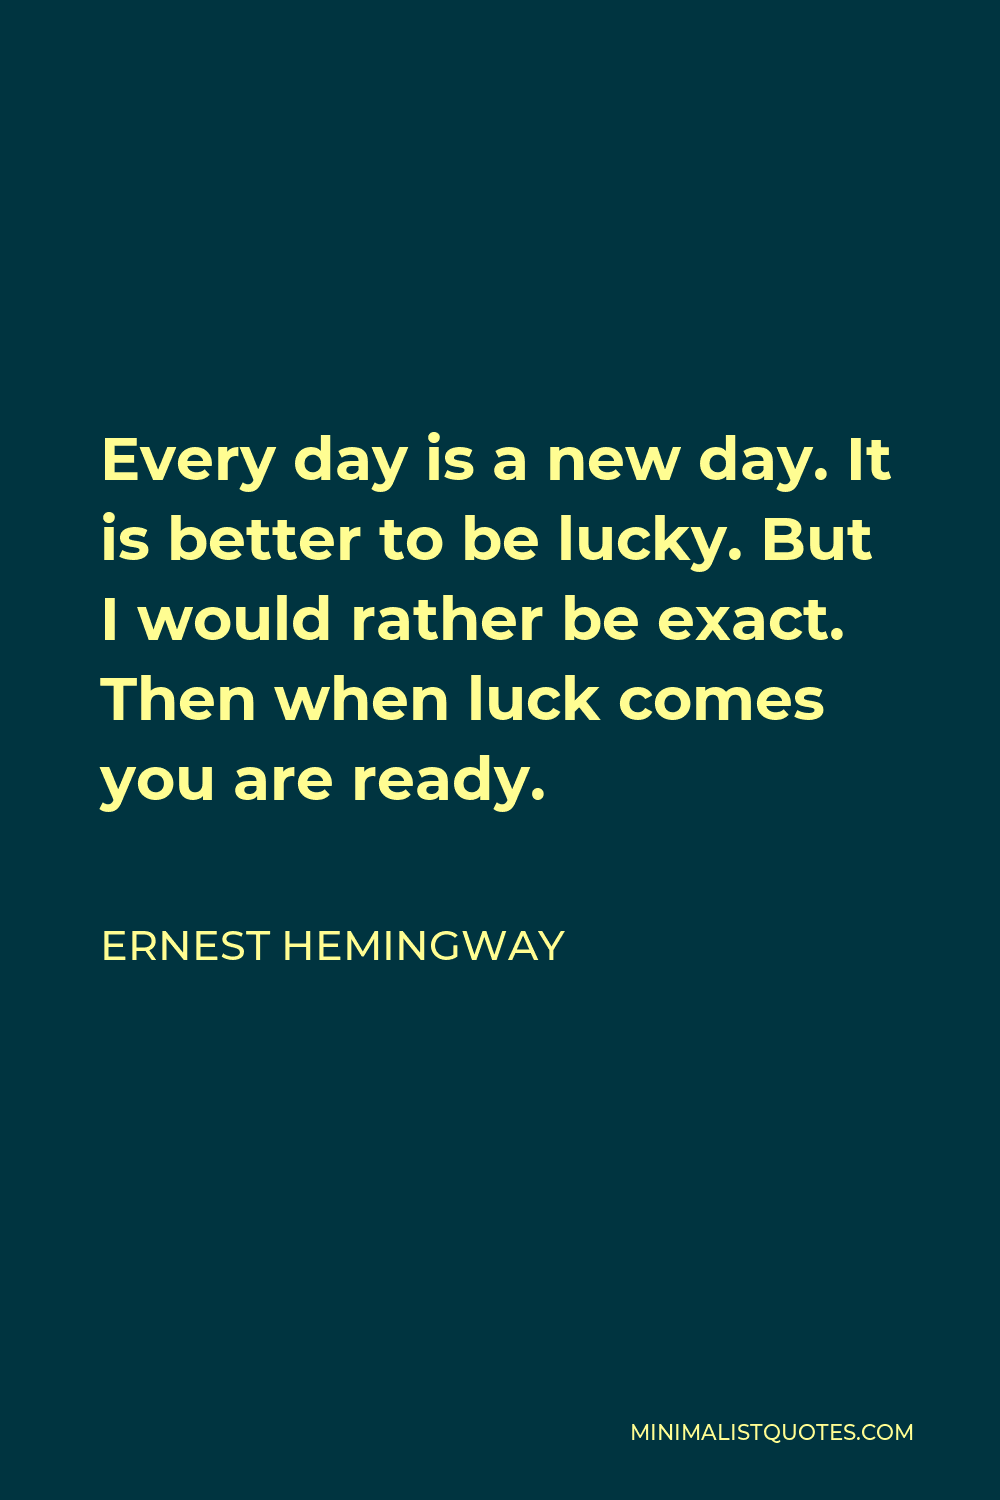 Ernest Hemingway Quote - Every day is a new day. It is better to be lucky. But I would rather be exact. Then when luck comes you are ready.